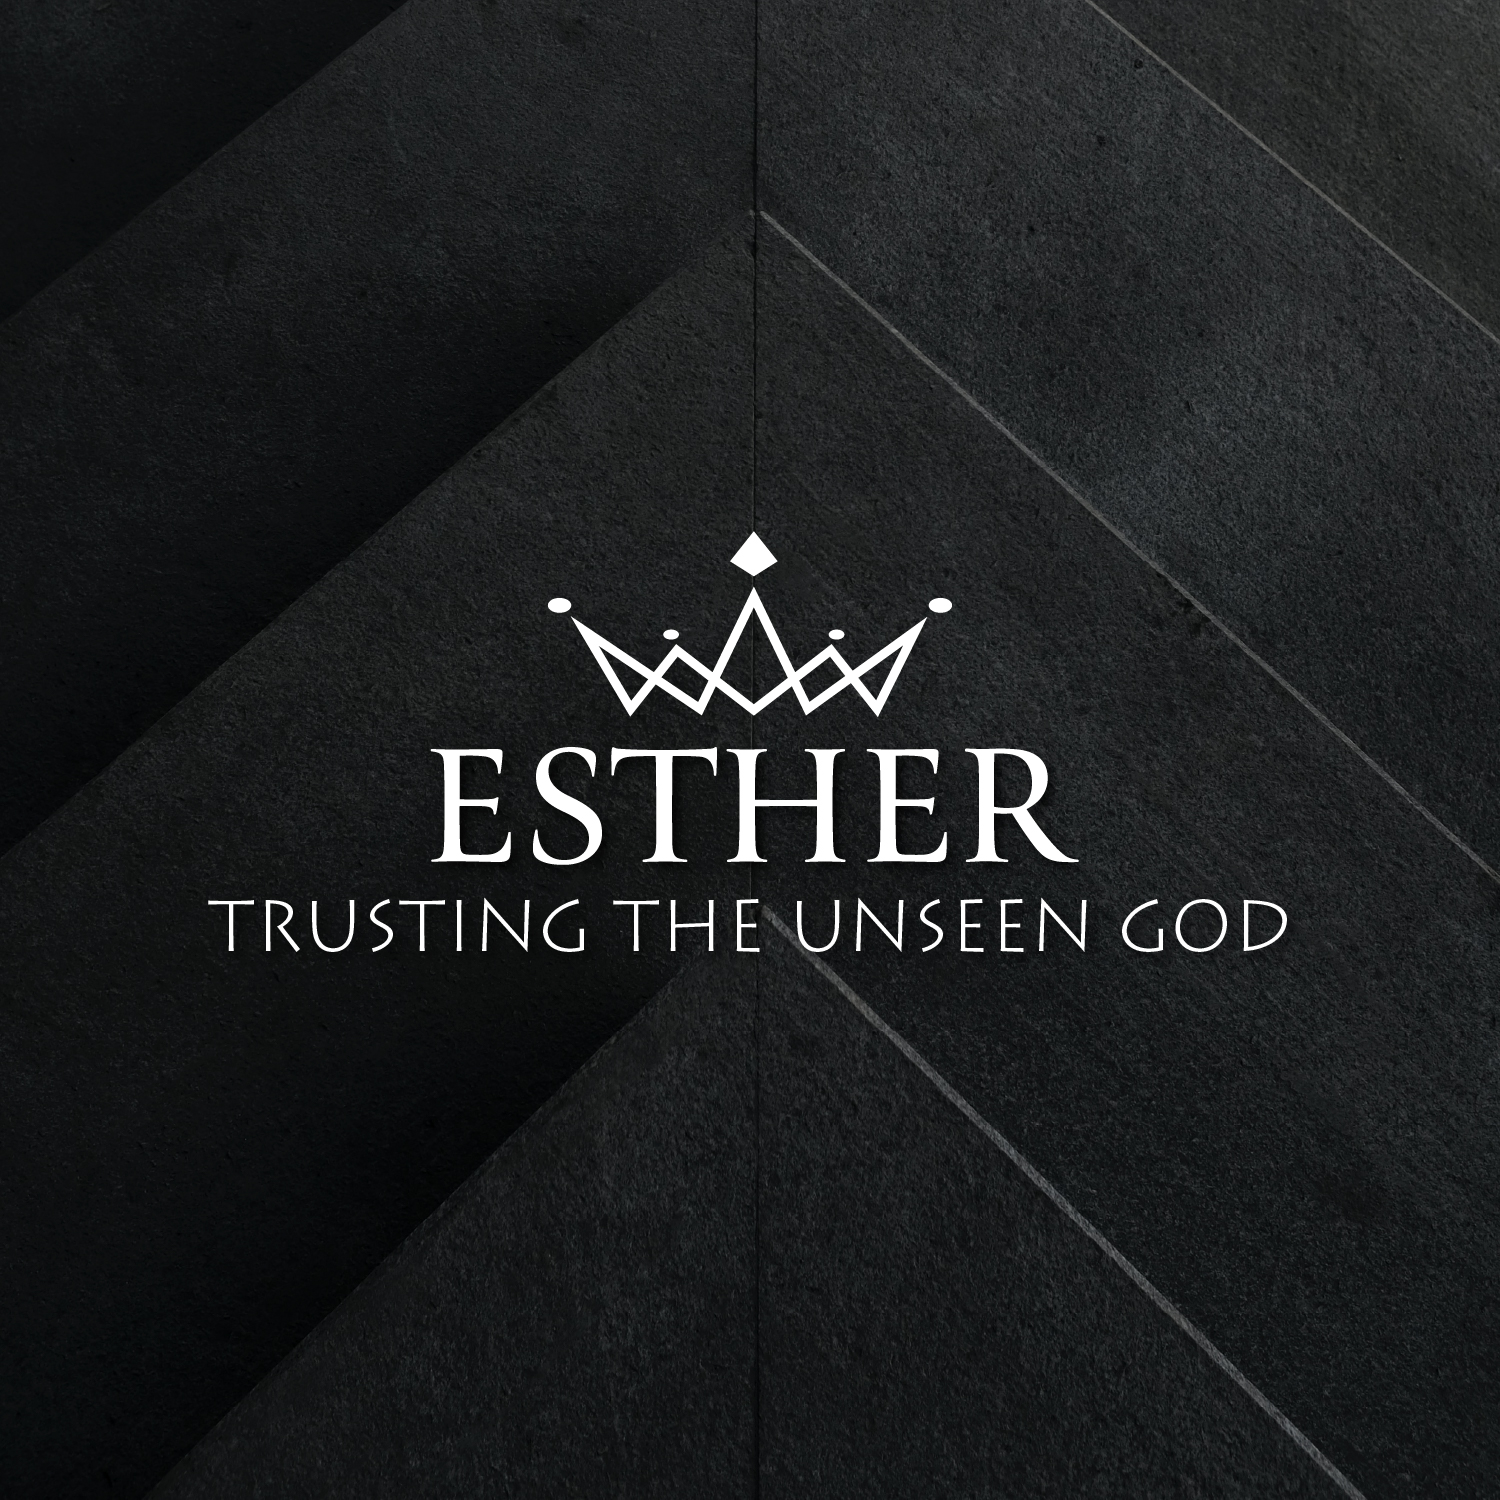 Esther 1:1-22 – The self-absorbed king (1-1-23)